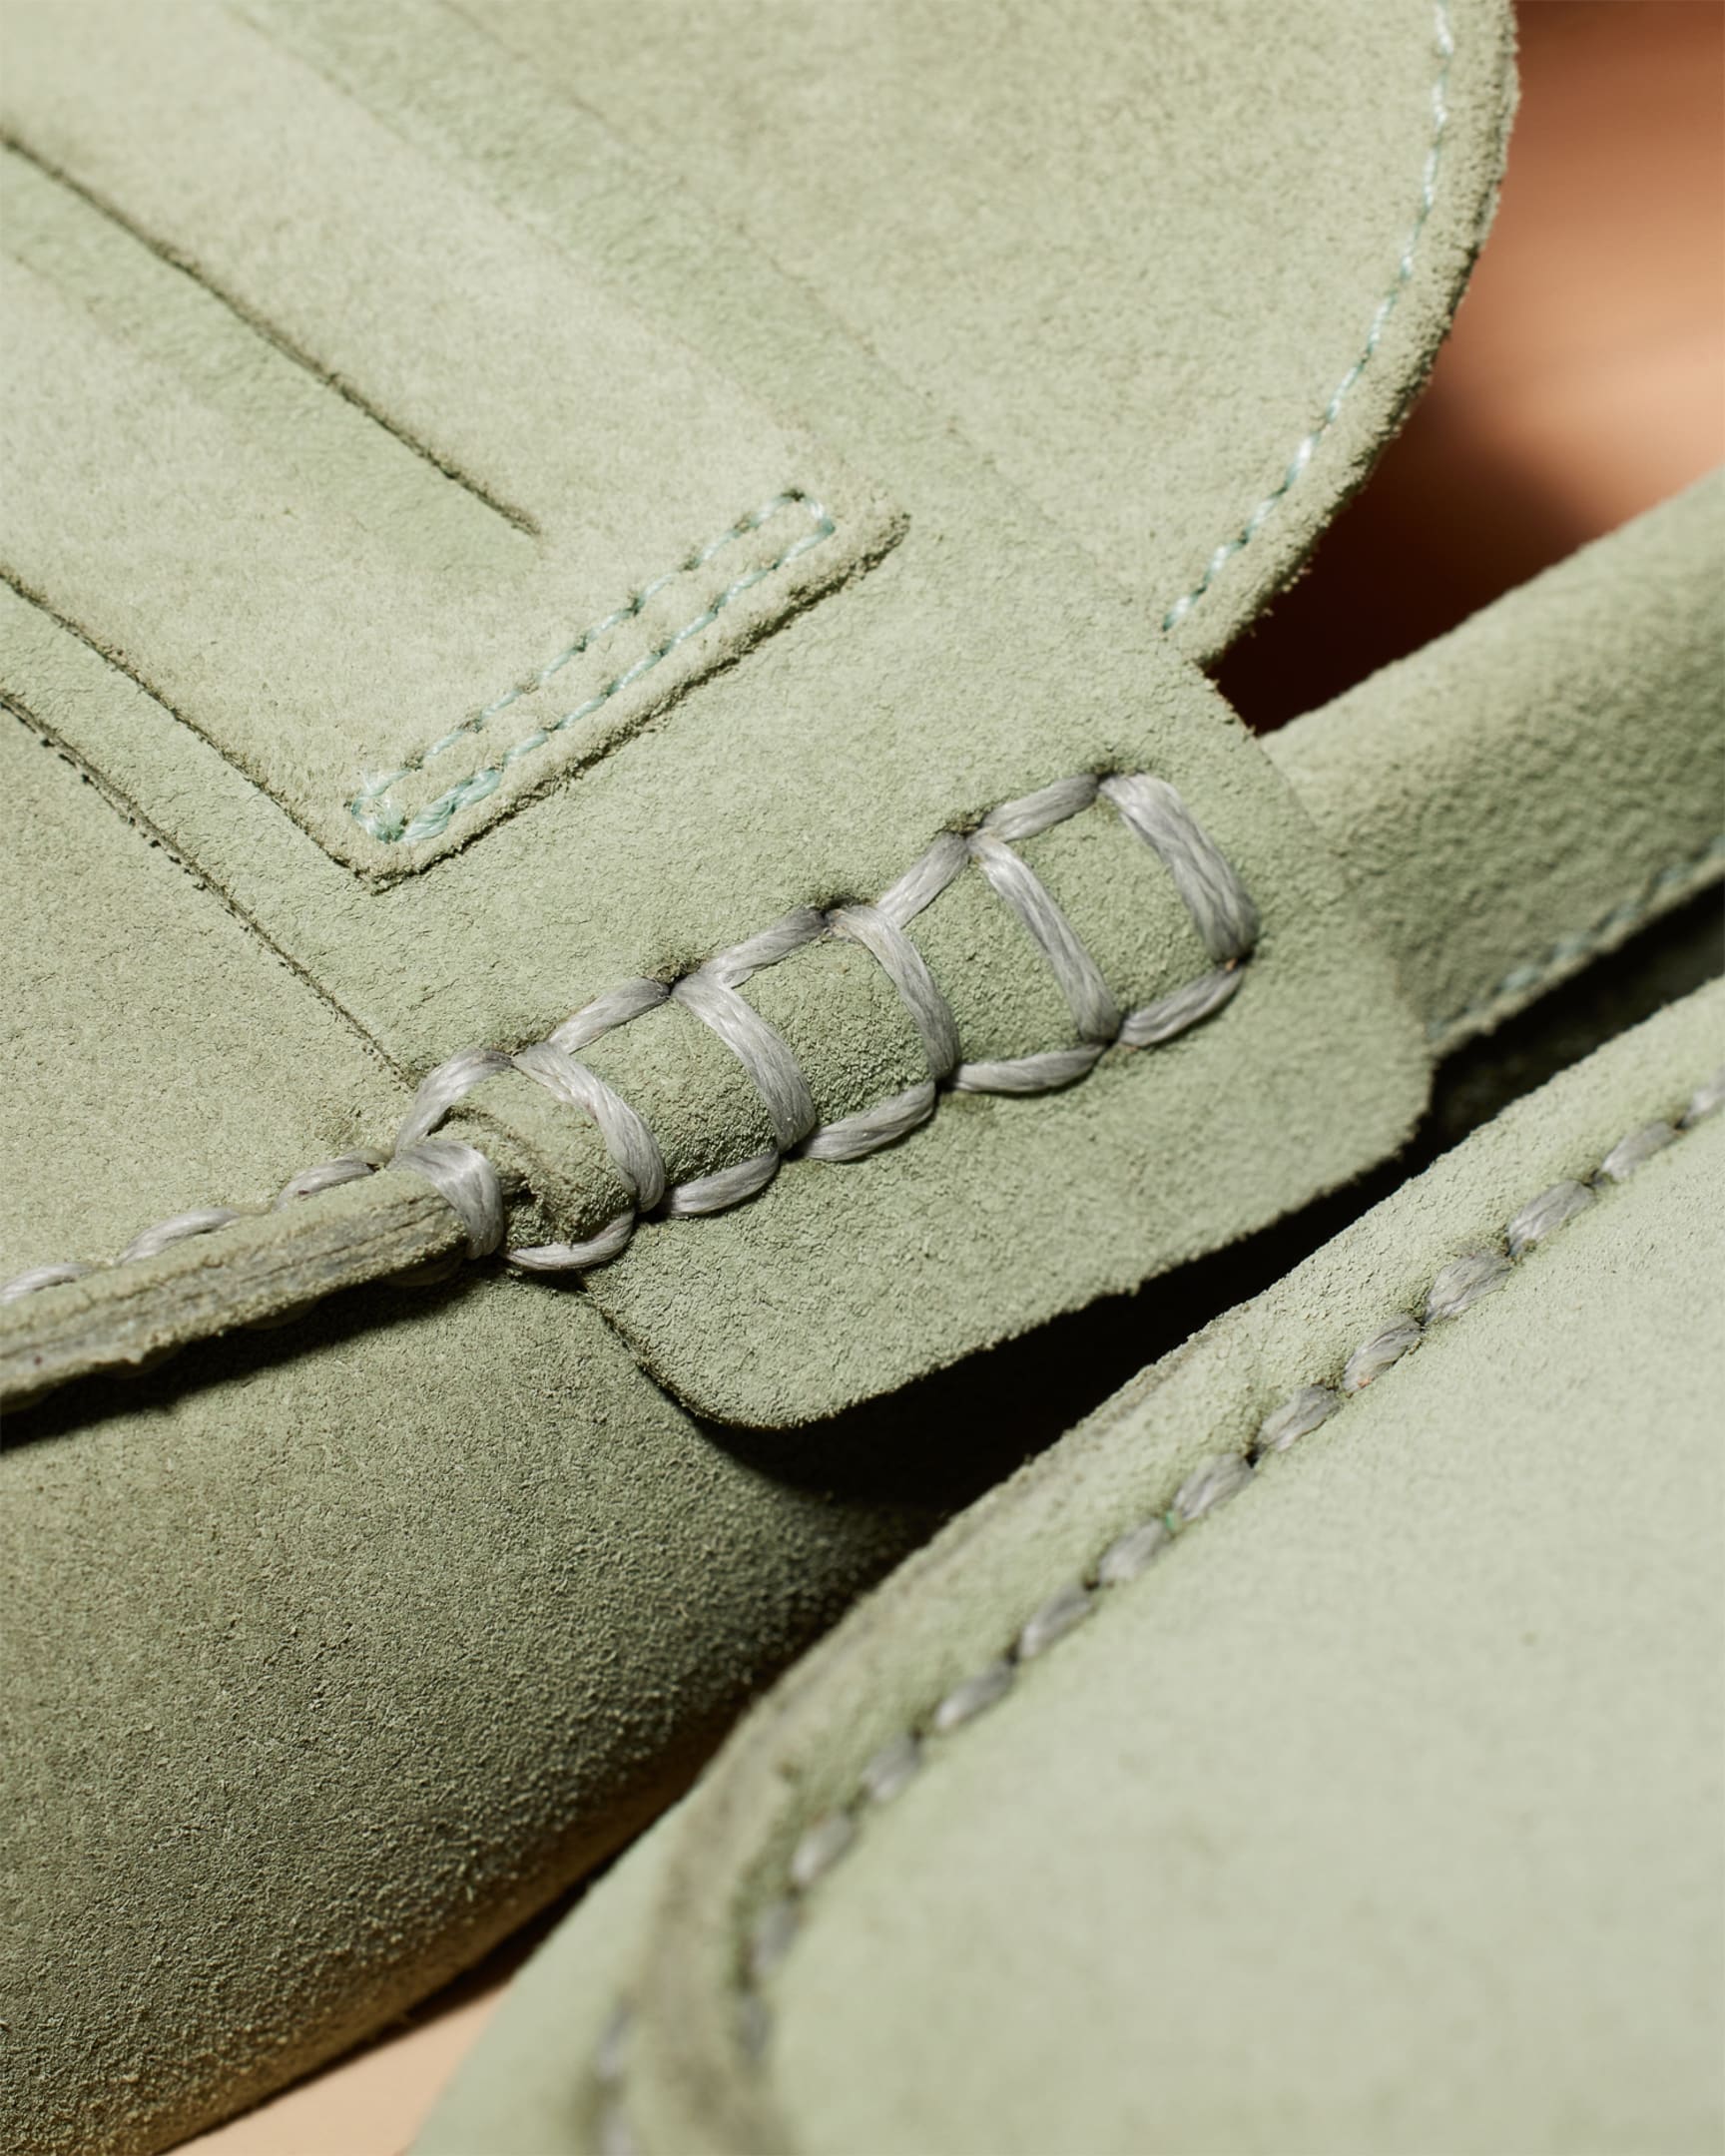 Detail View - Women's Mint Green Suede 'Felicity' Loafers Paul Smith